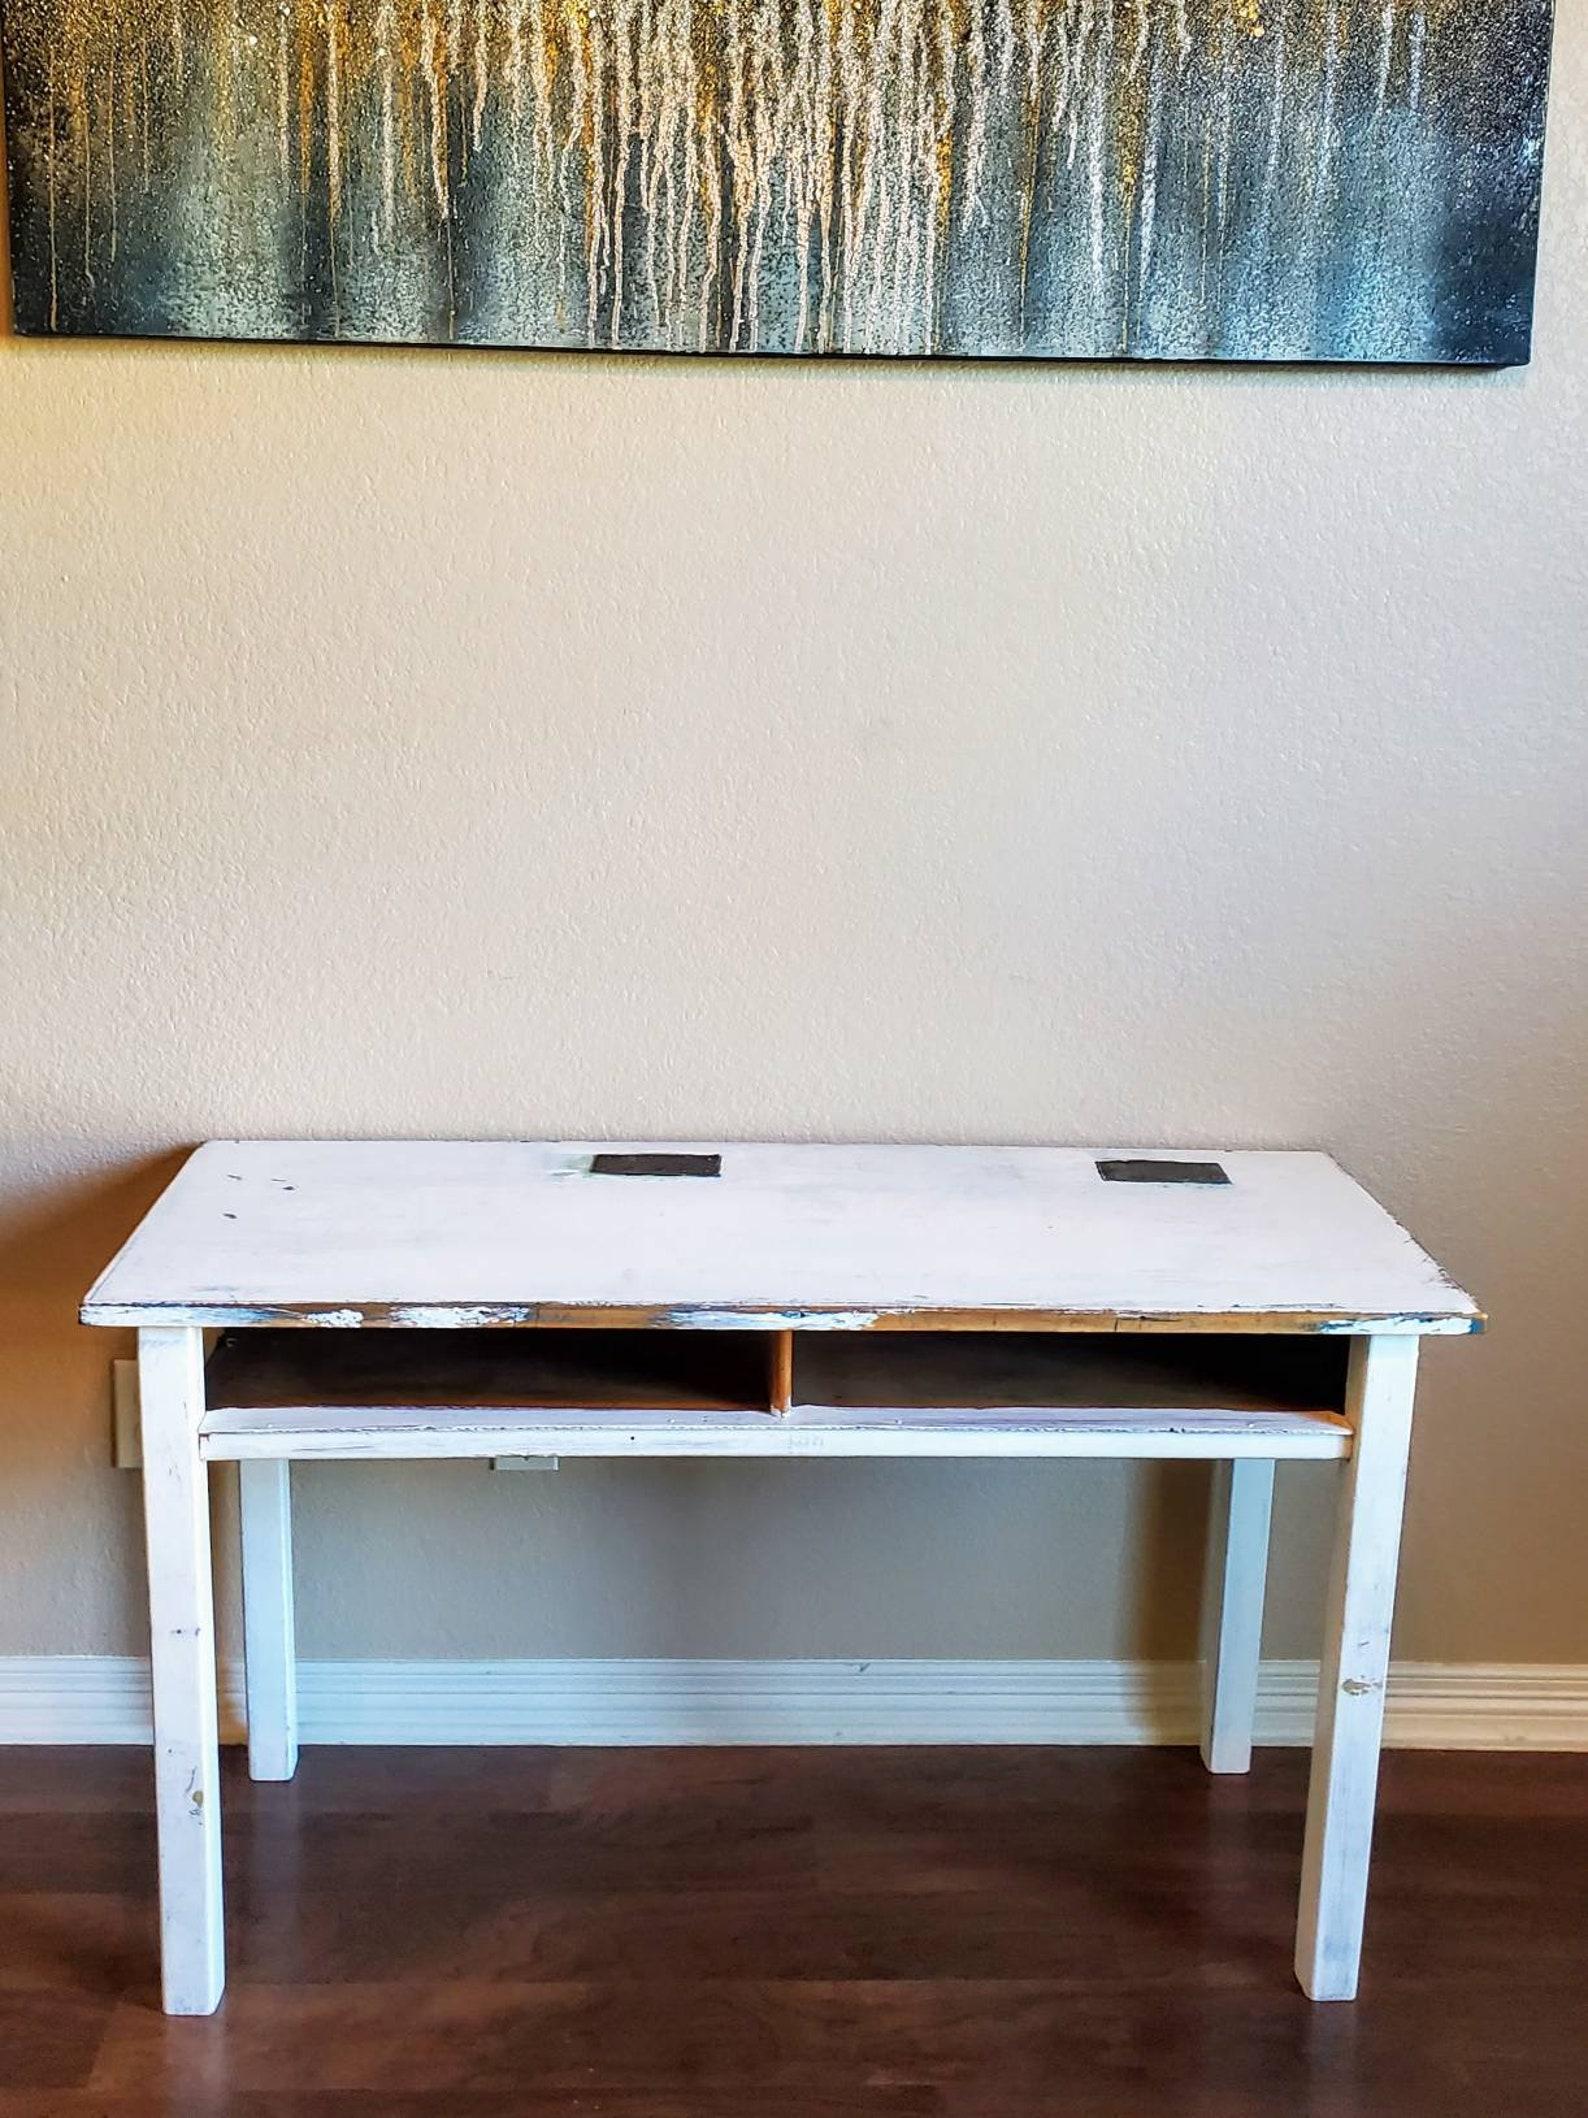 A vintage American Mid-Century Industrial Modern wooden science laboratory tandem desk work table. The distressed painted solid pine table having a bright shabby chic antiqued white finish, two metal plates with reviots accent the slightly